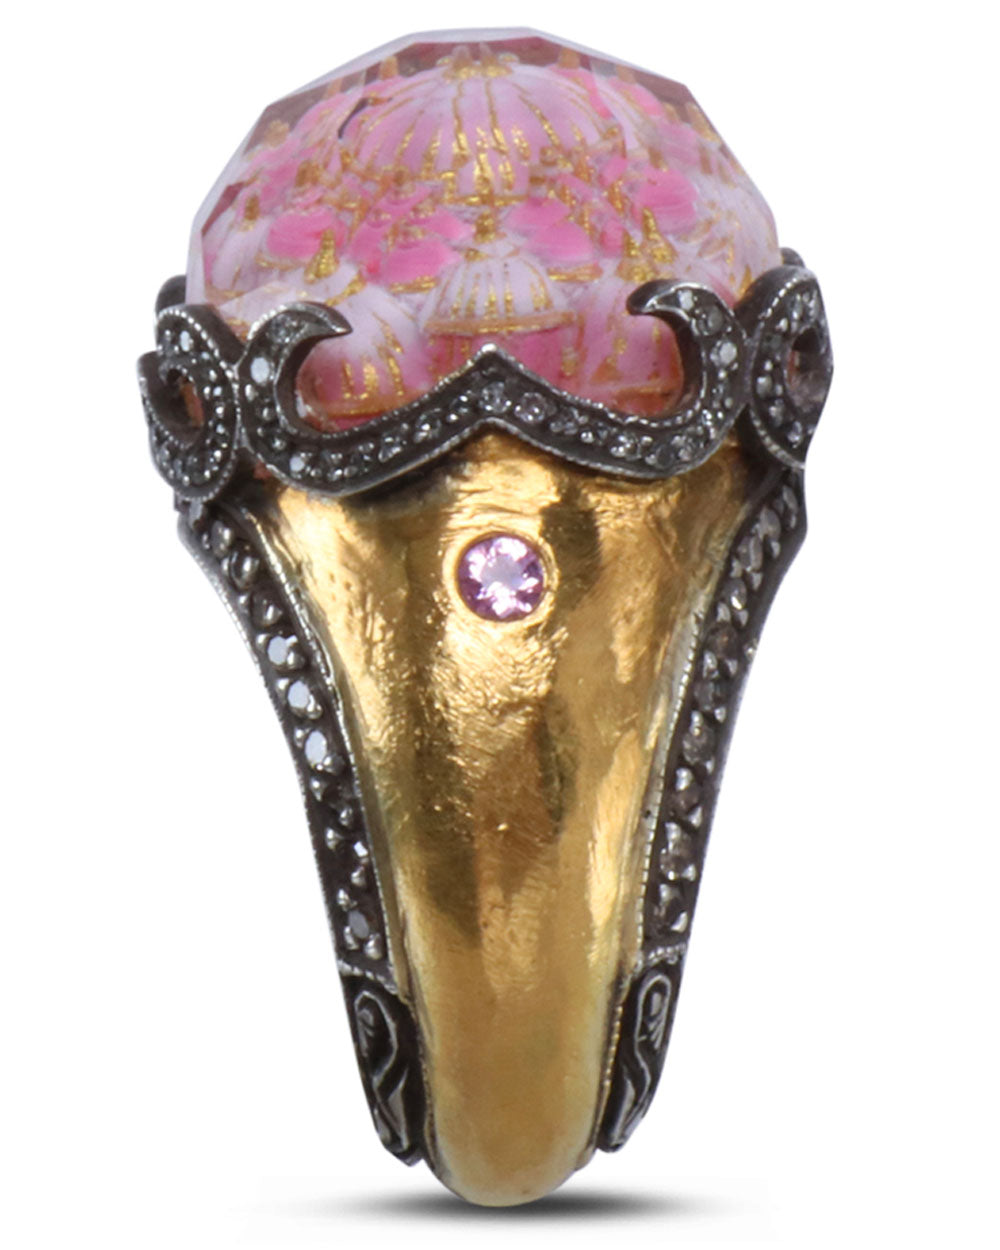 Ottoman Archt Rock Ring